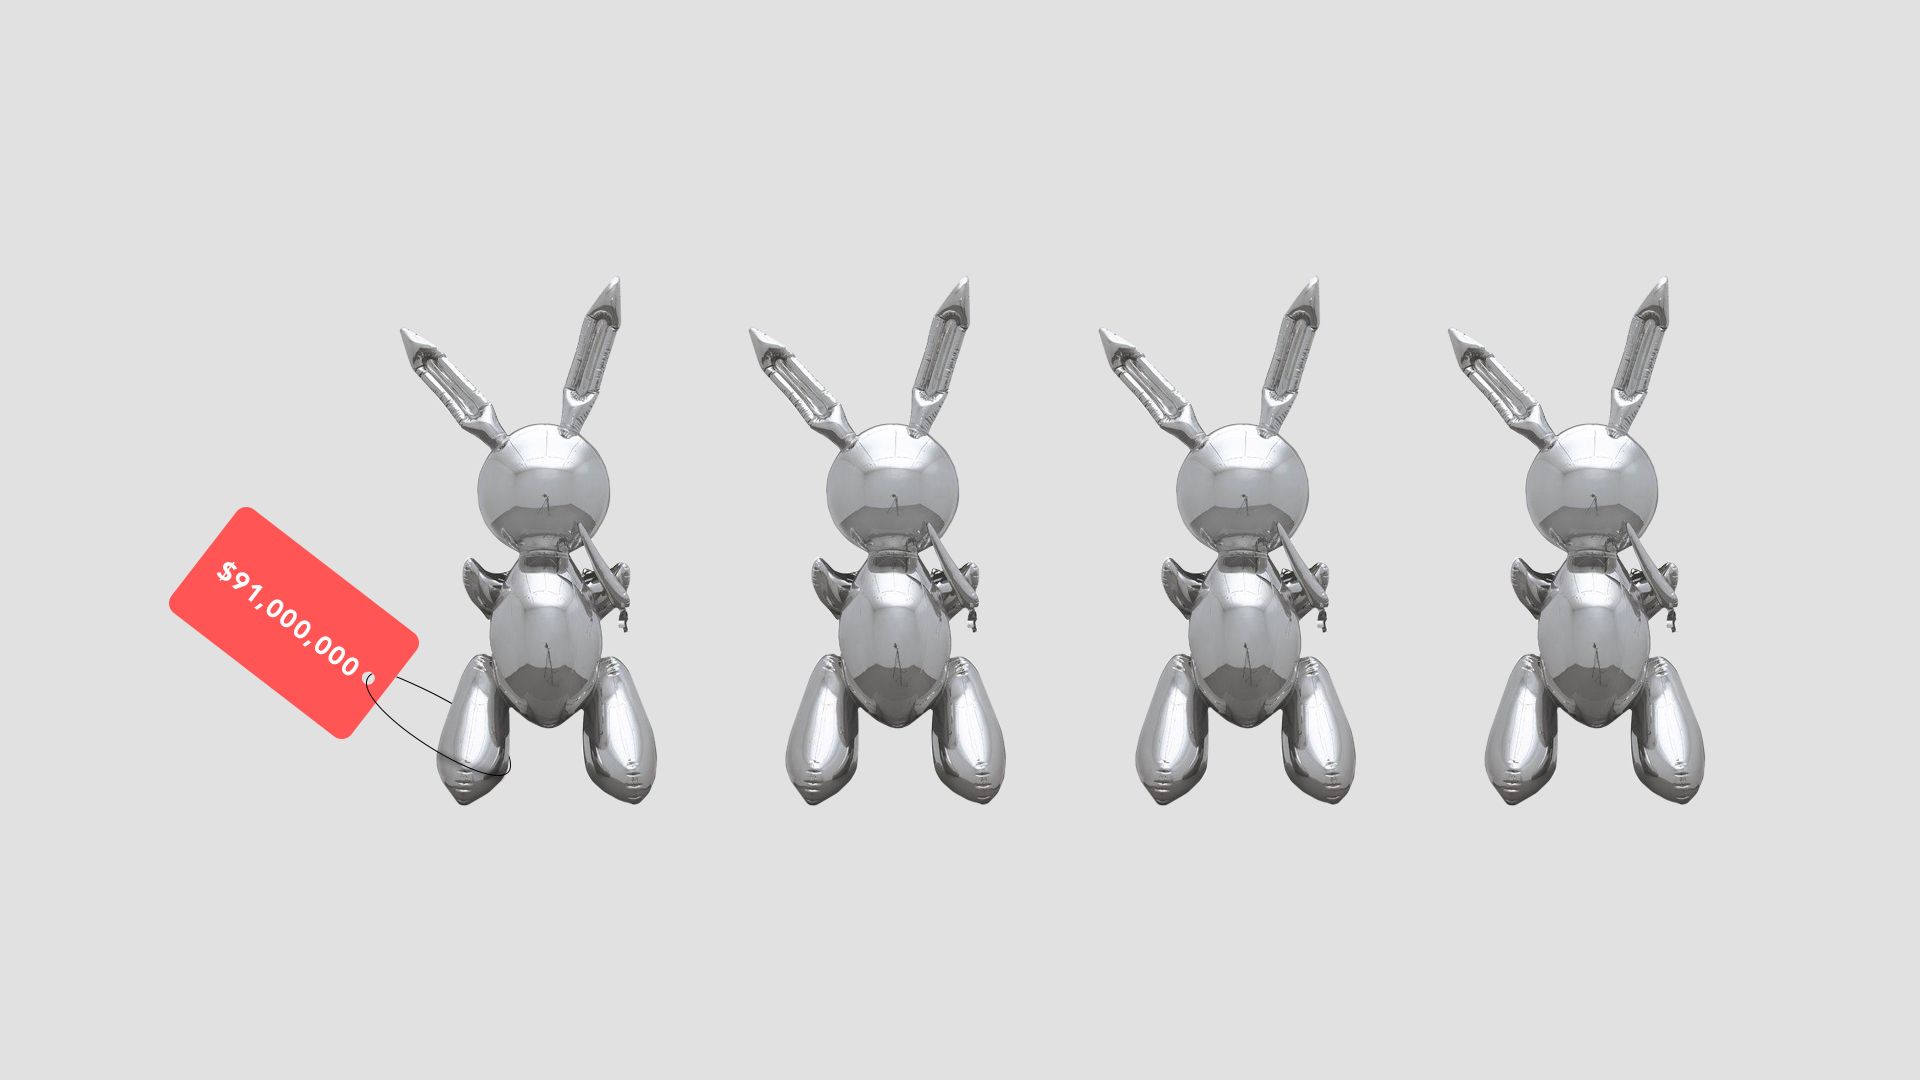 Illustration of four sculpted rabbits. One has a $91,000,000 price tag